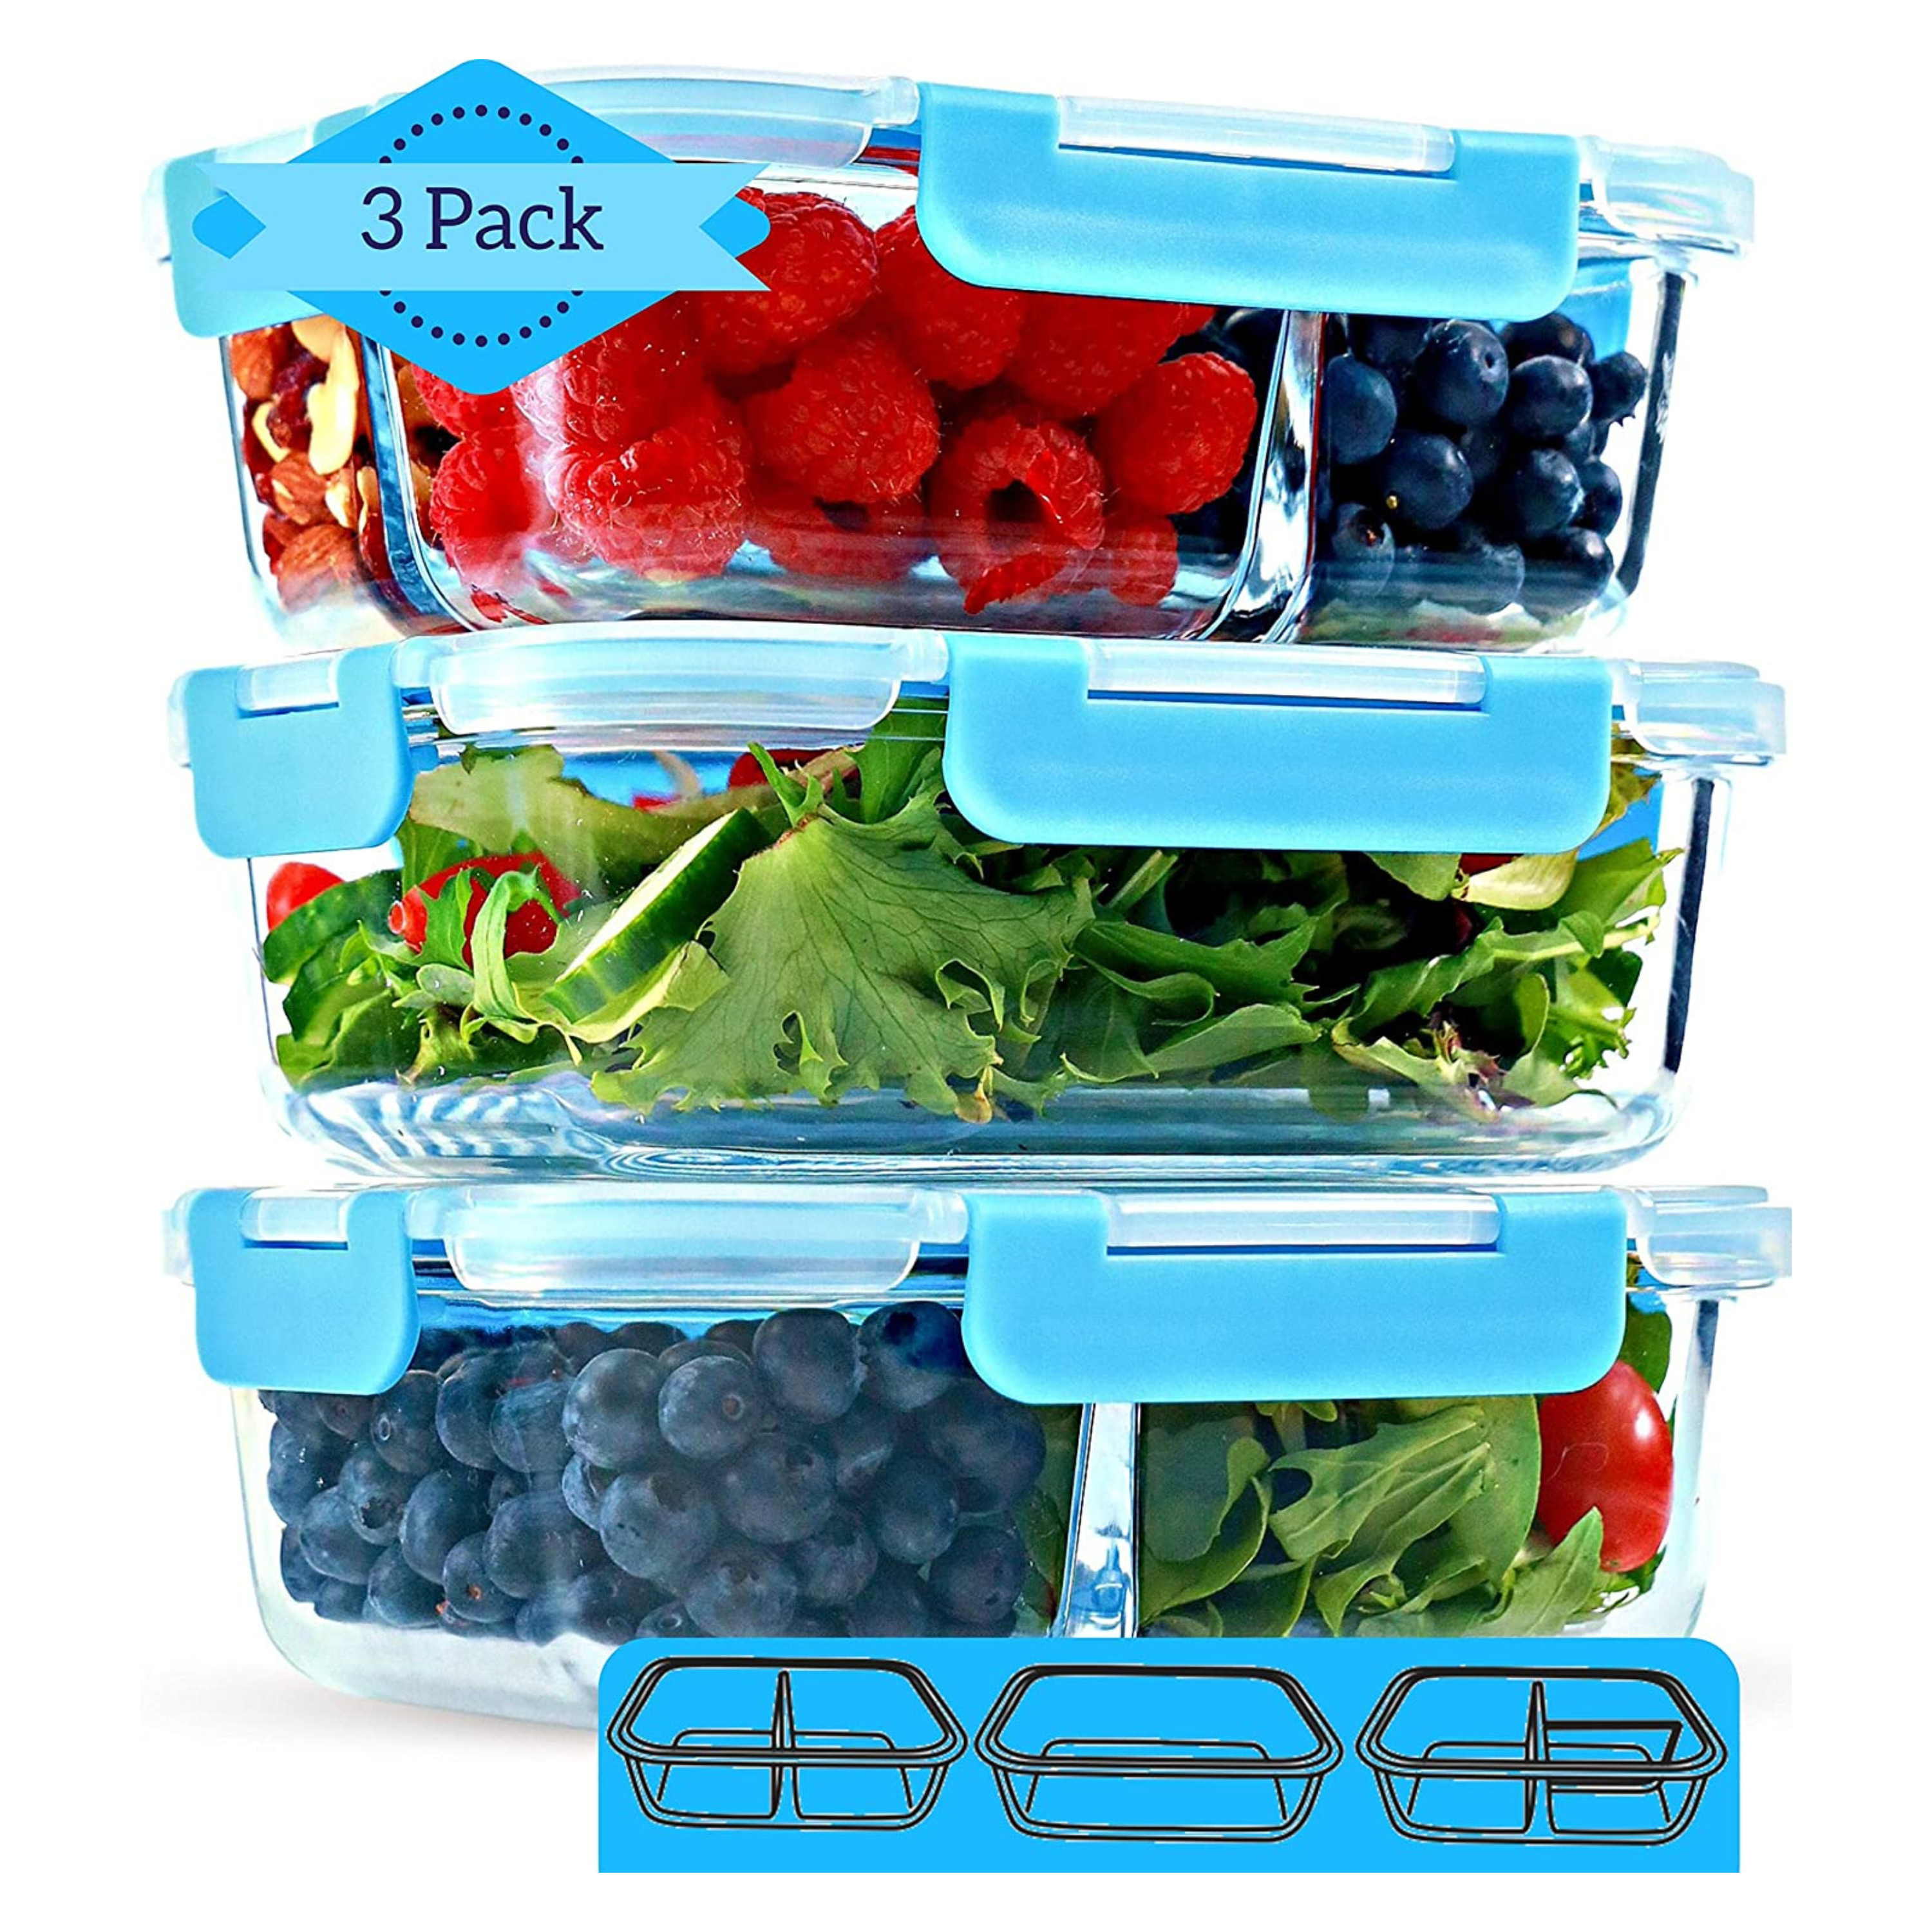 Glass Food Storage Containers-3, Two Compartment Portion Control Meal Prep  Glassware with Snap Shut Lids-Microwave, Dishwasher Safe by Hastings Home